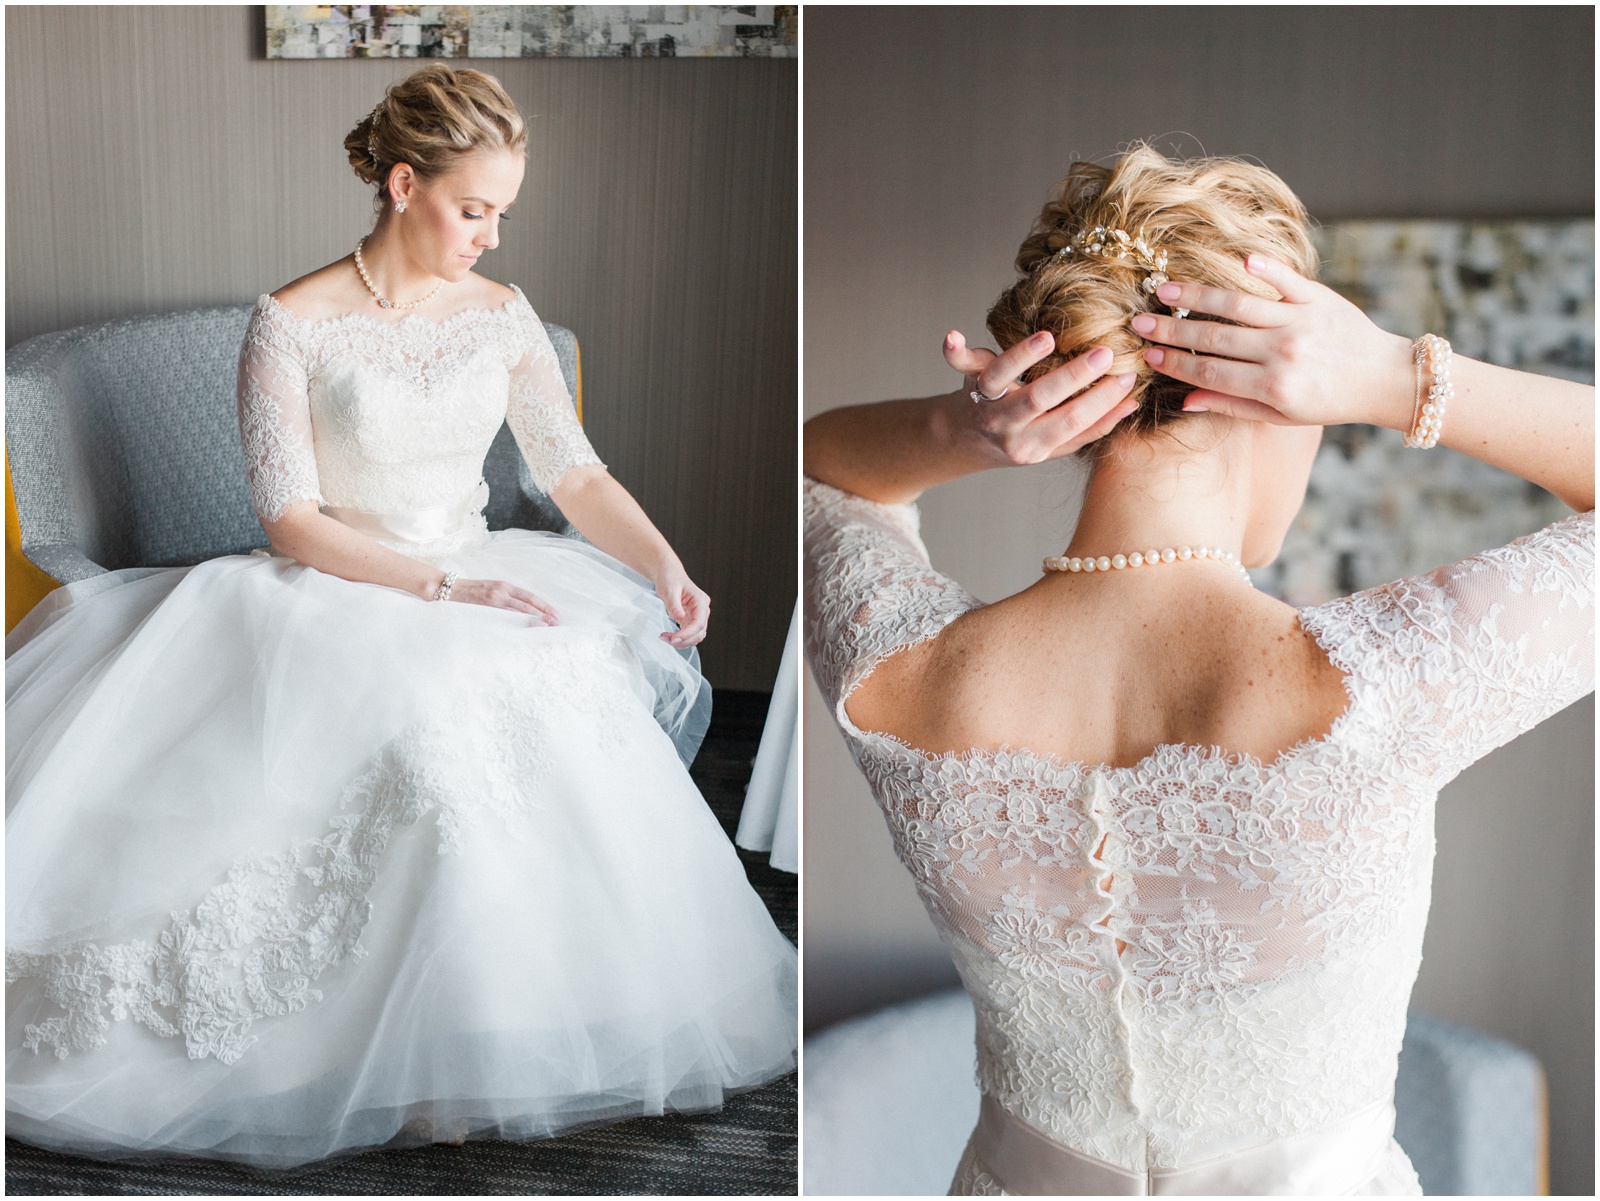 Where to Find Your Wedding Dress in Chicago: Dimitra's Bridal Couture